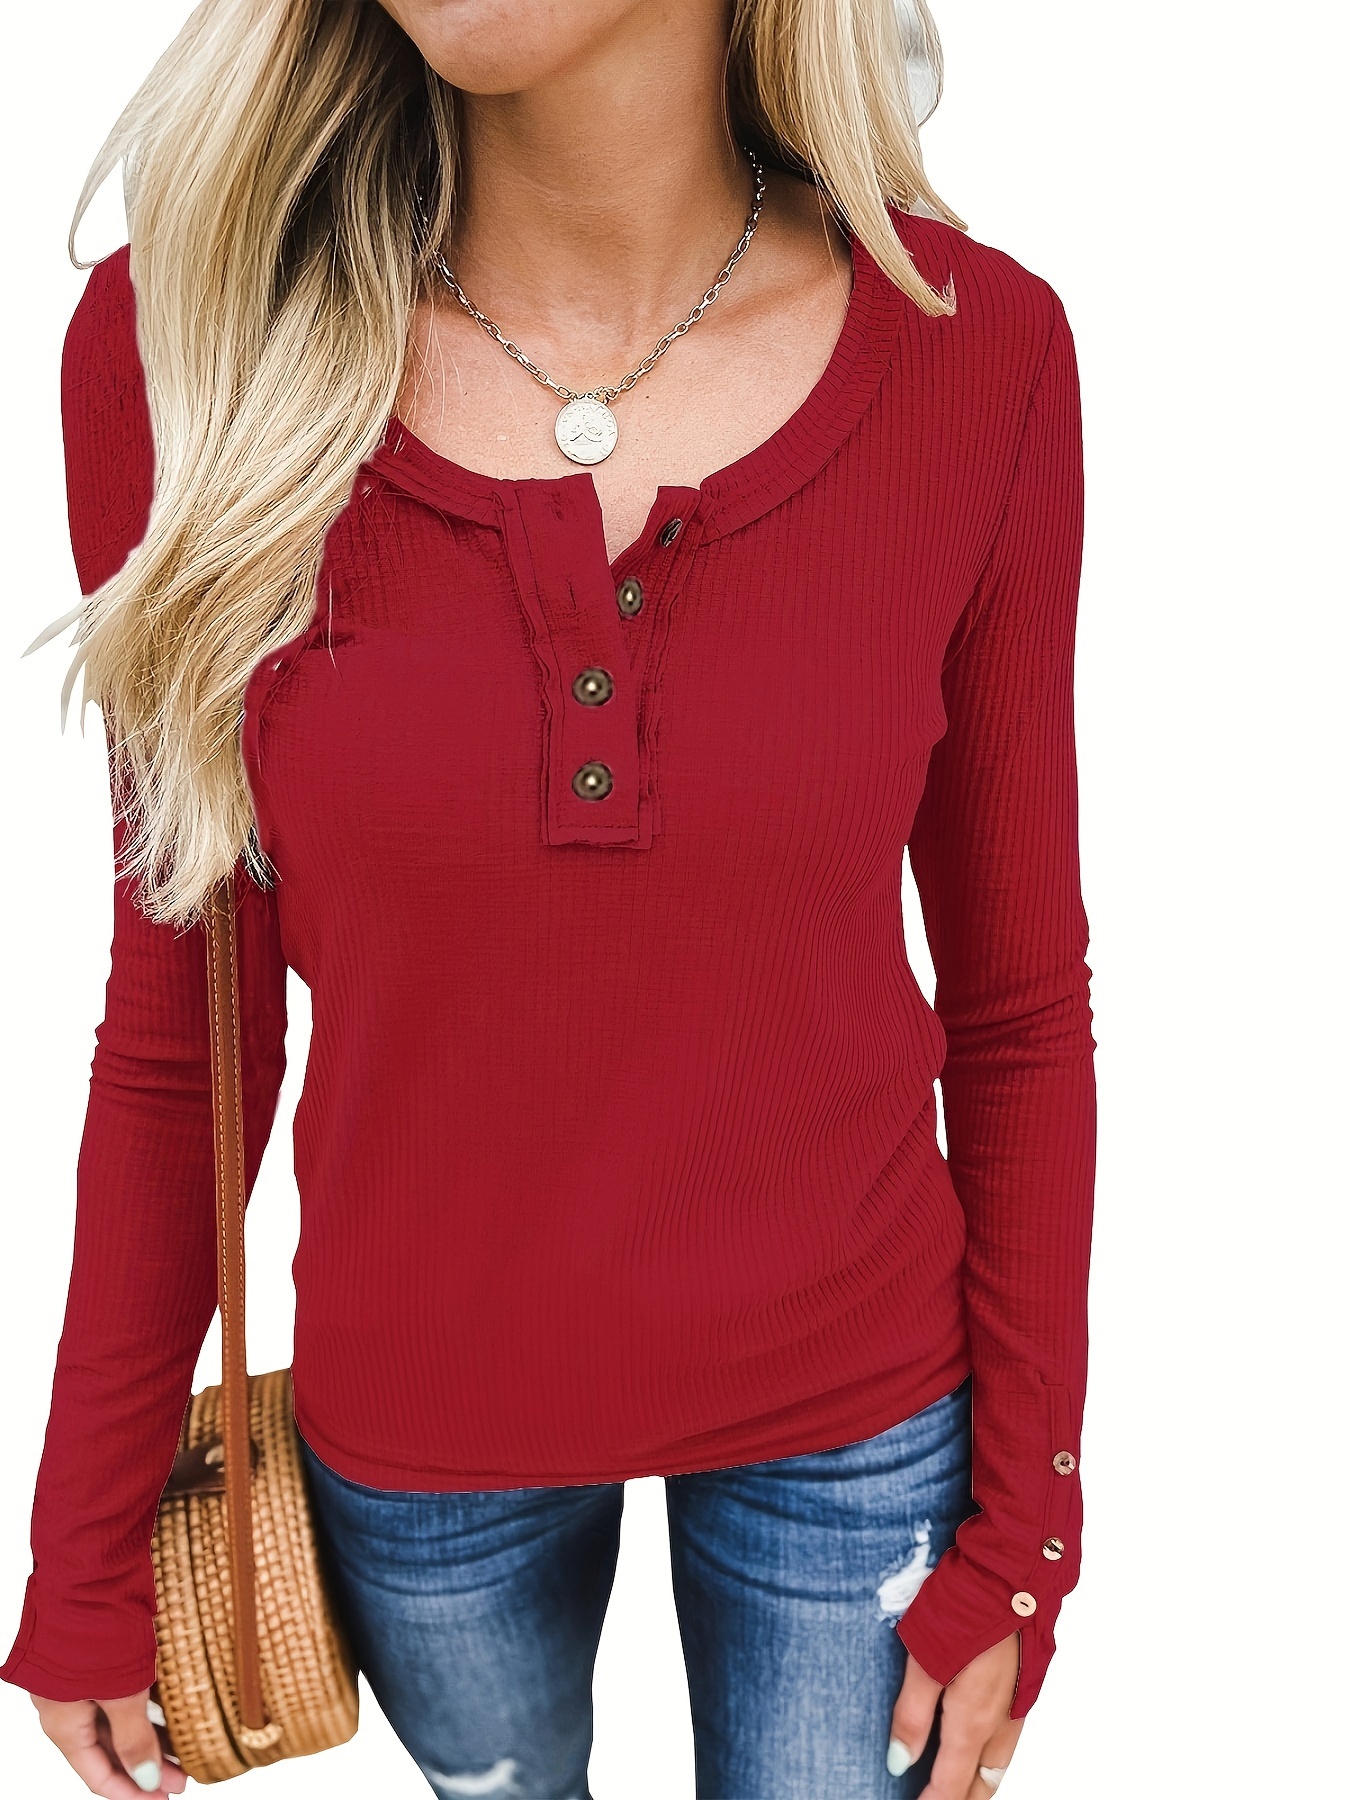 Elainilye Fashion Women's Undershirt Tight Long Sleeve Shirt Comfortable  Solid Color Round Neck Underlay Tops,Red 